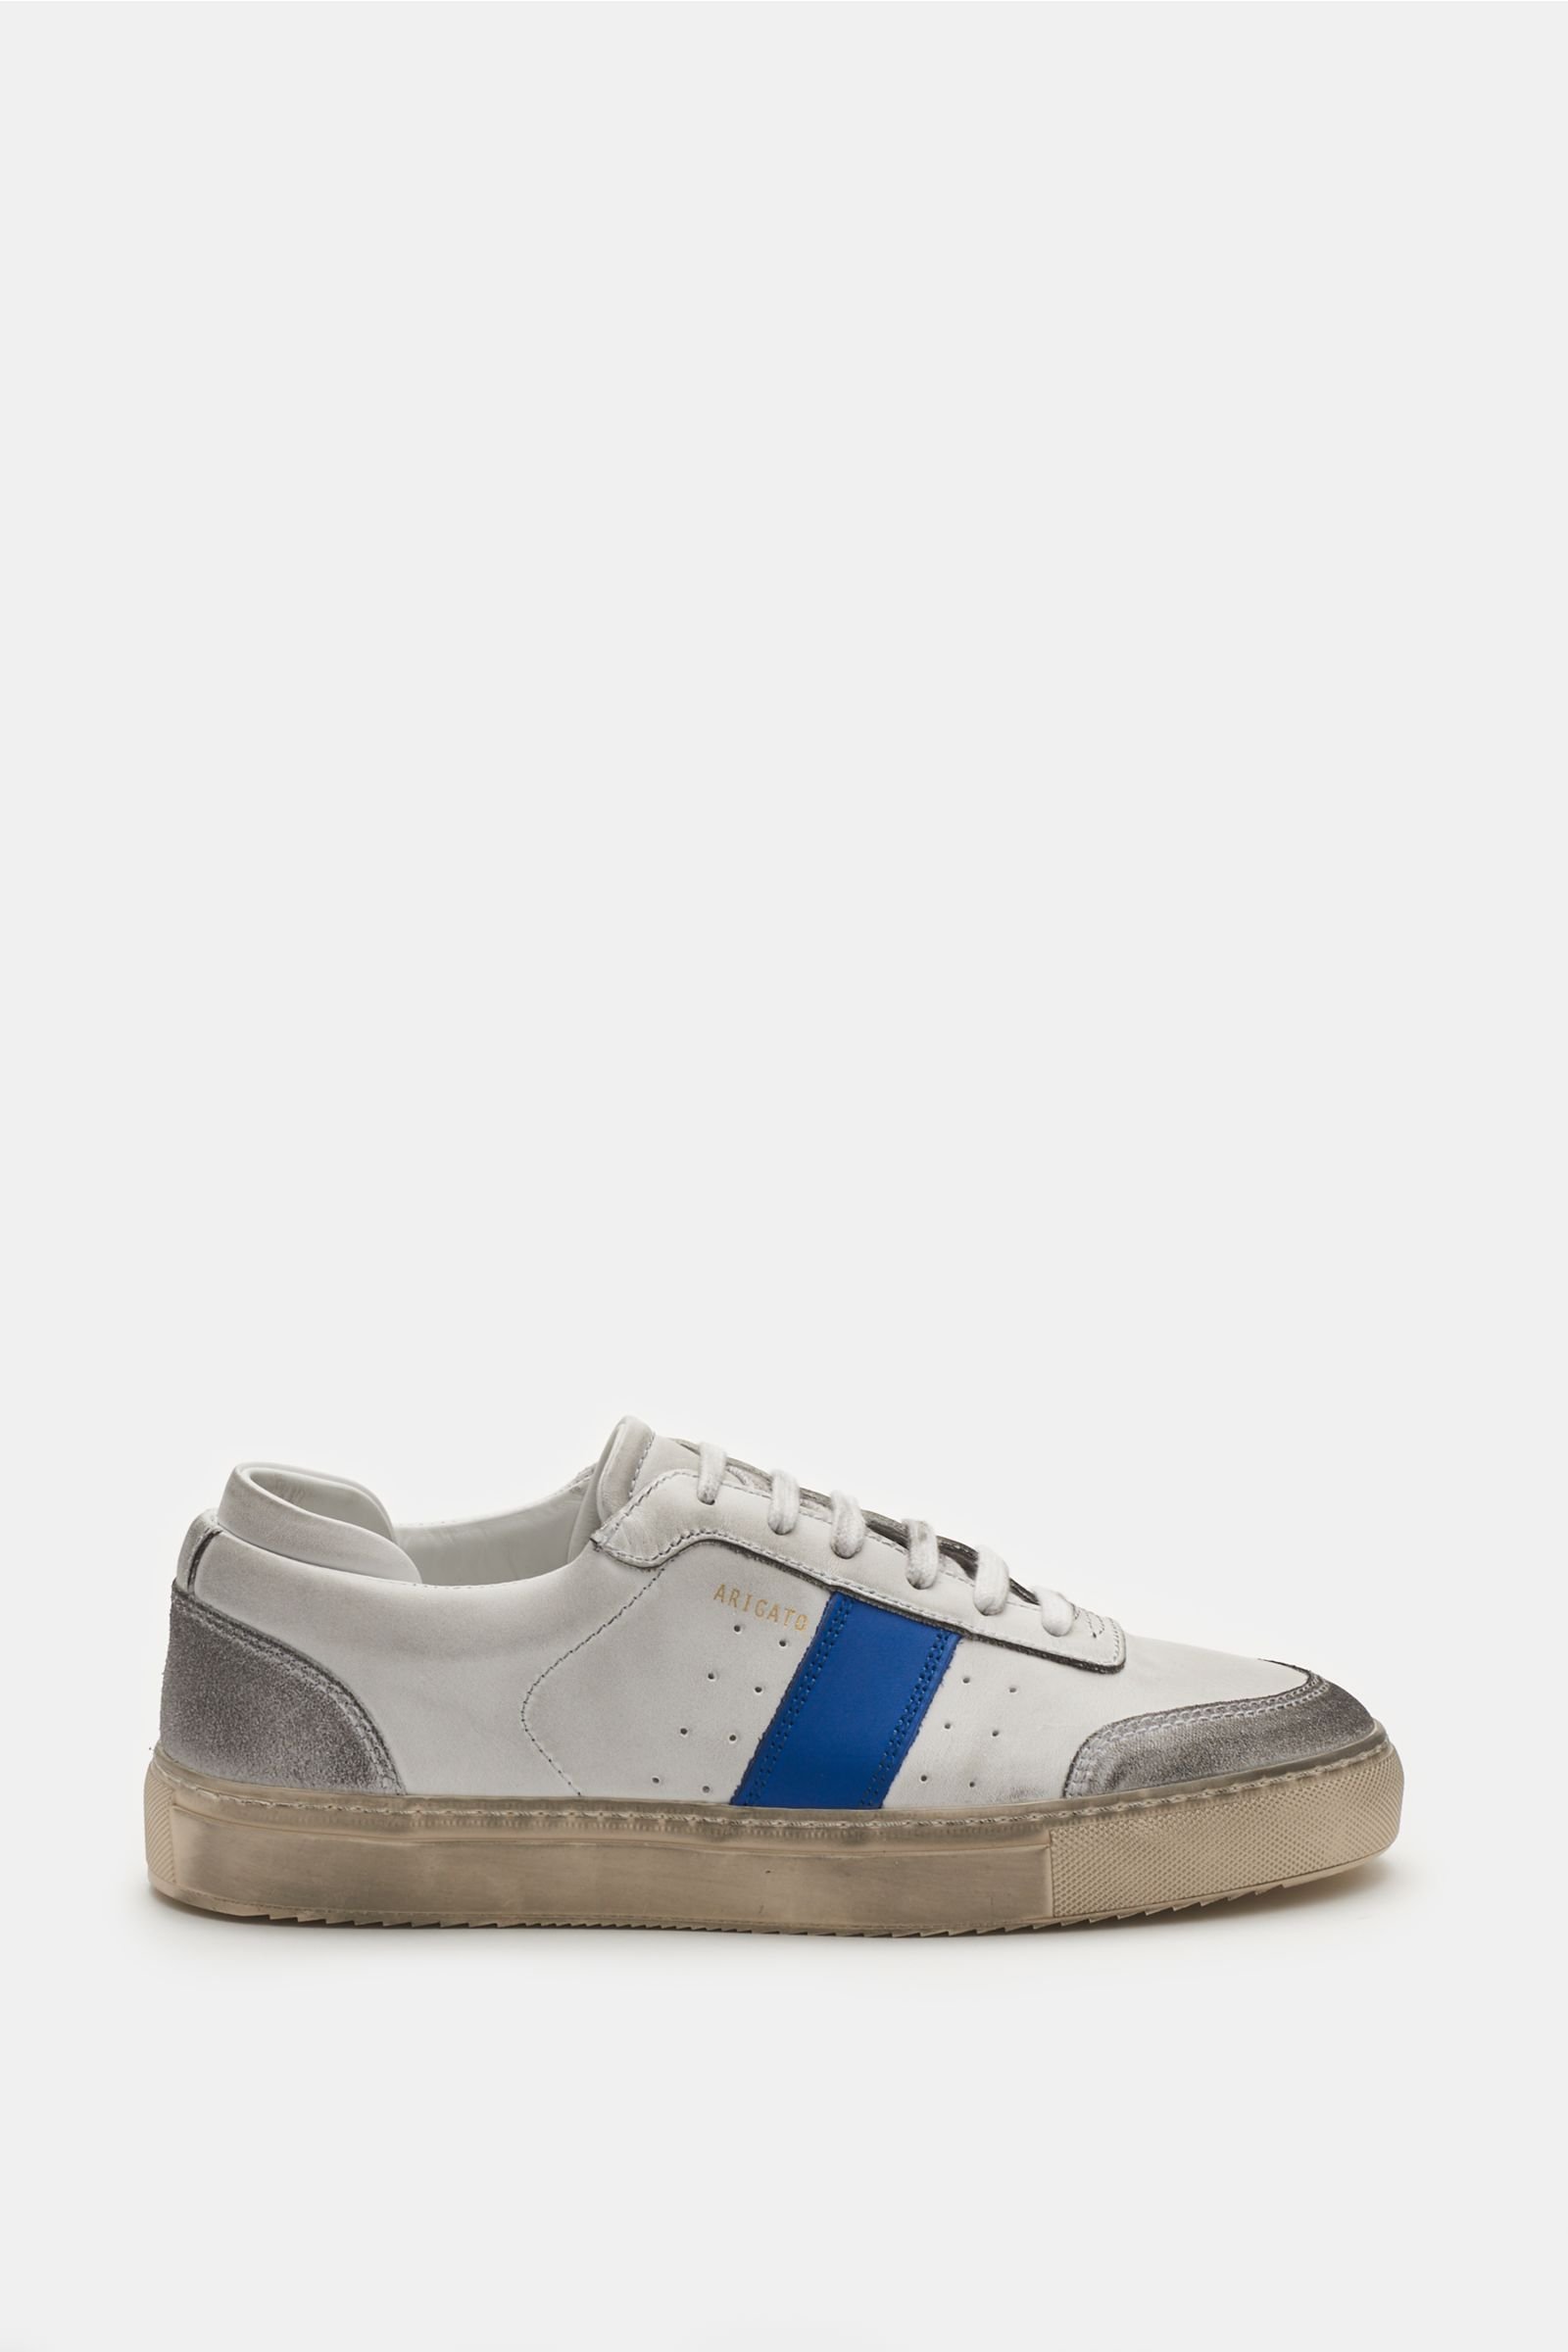 Sneakers 'Dunk' off-white/navy